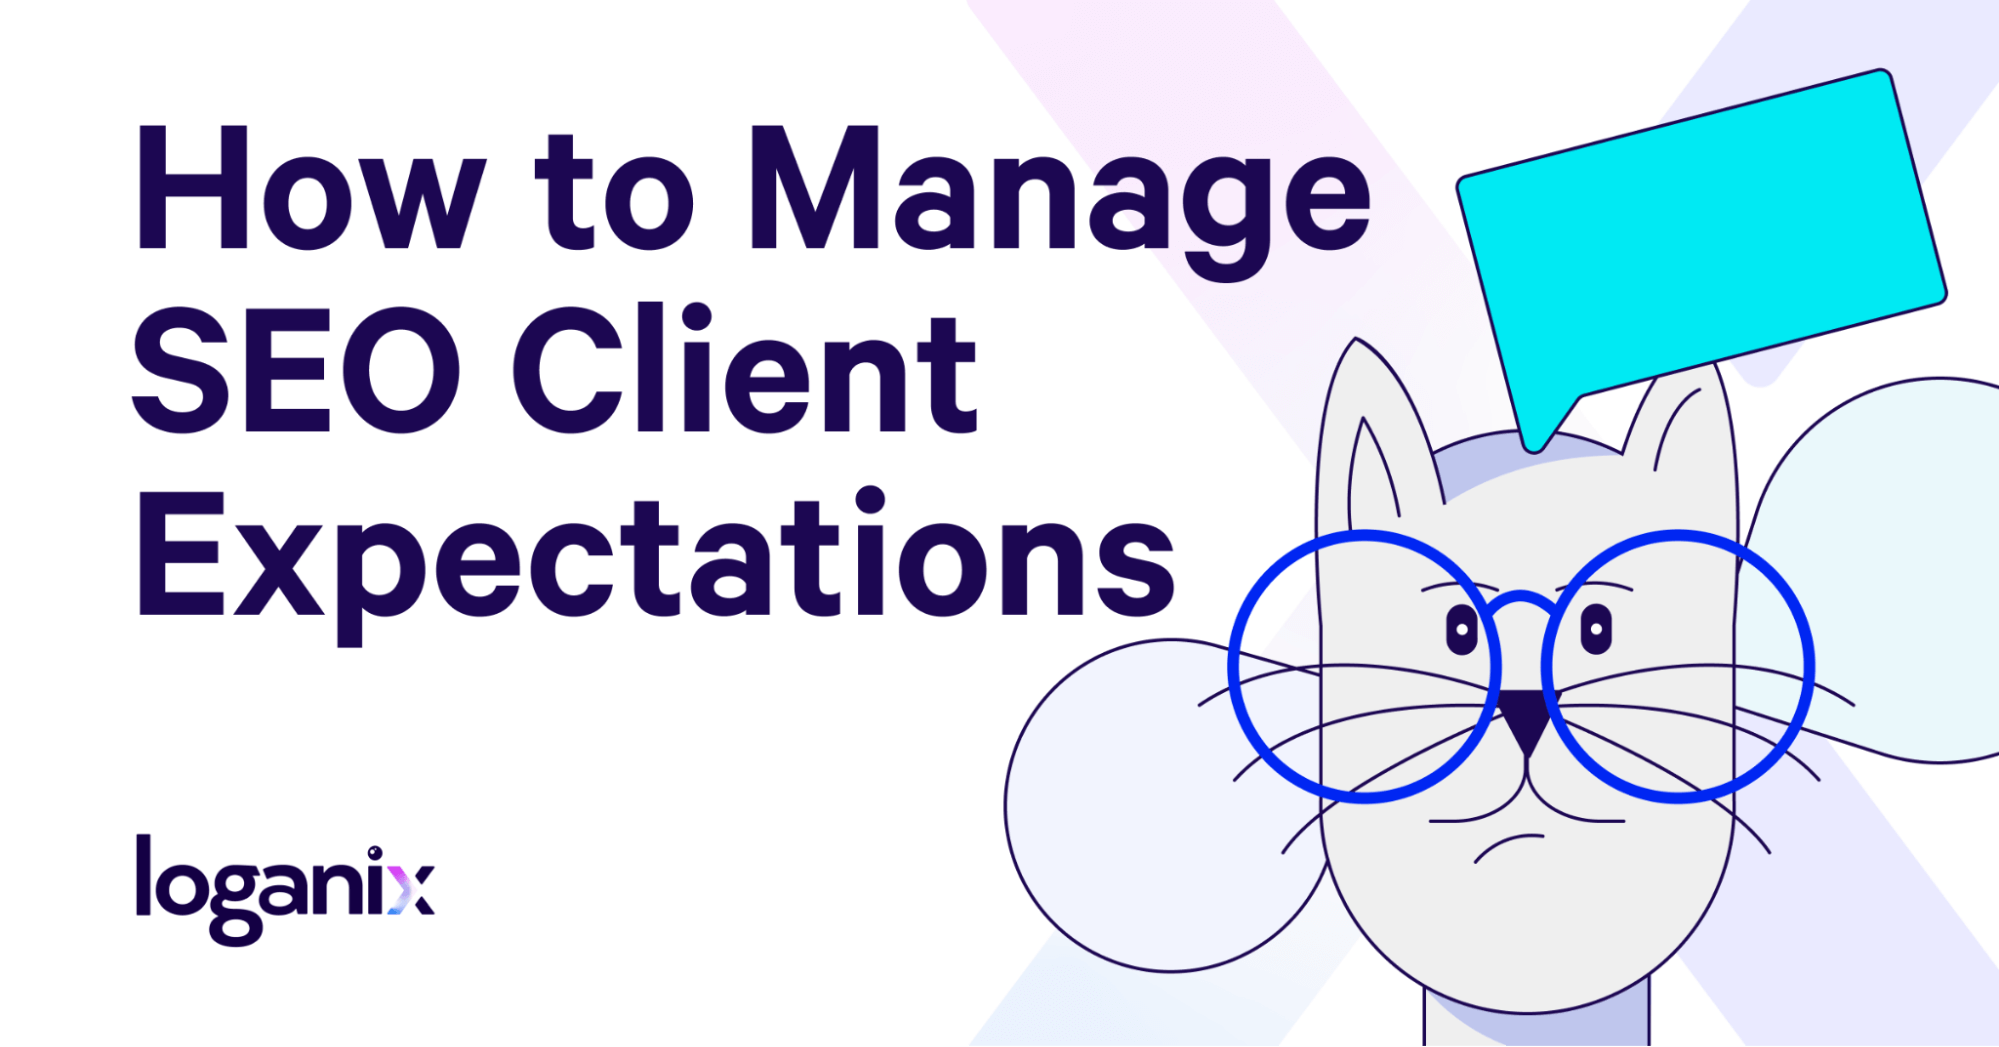 How to Manage SEO Client Expectations